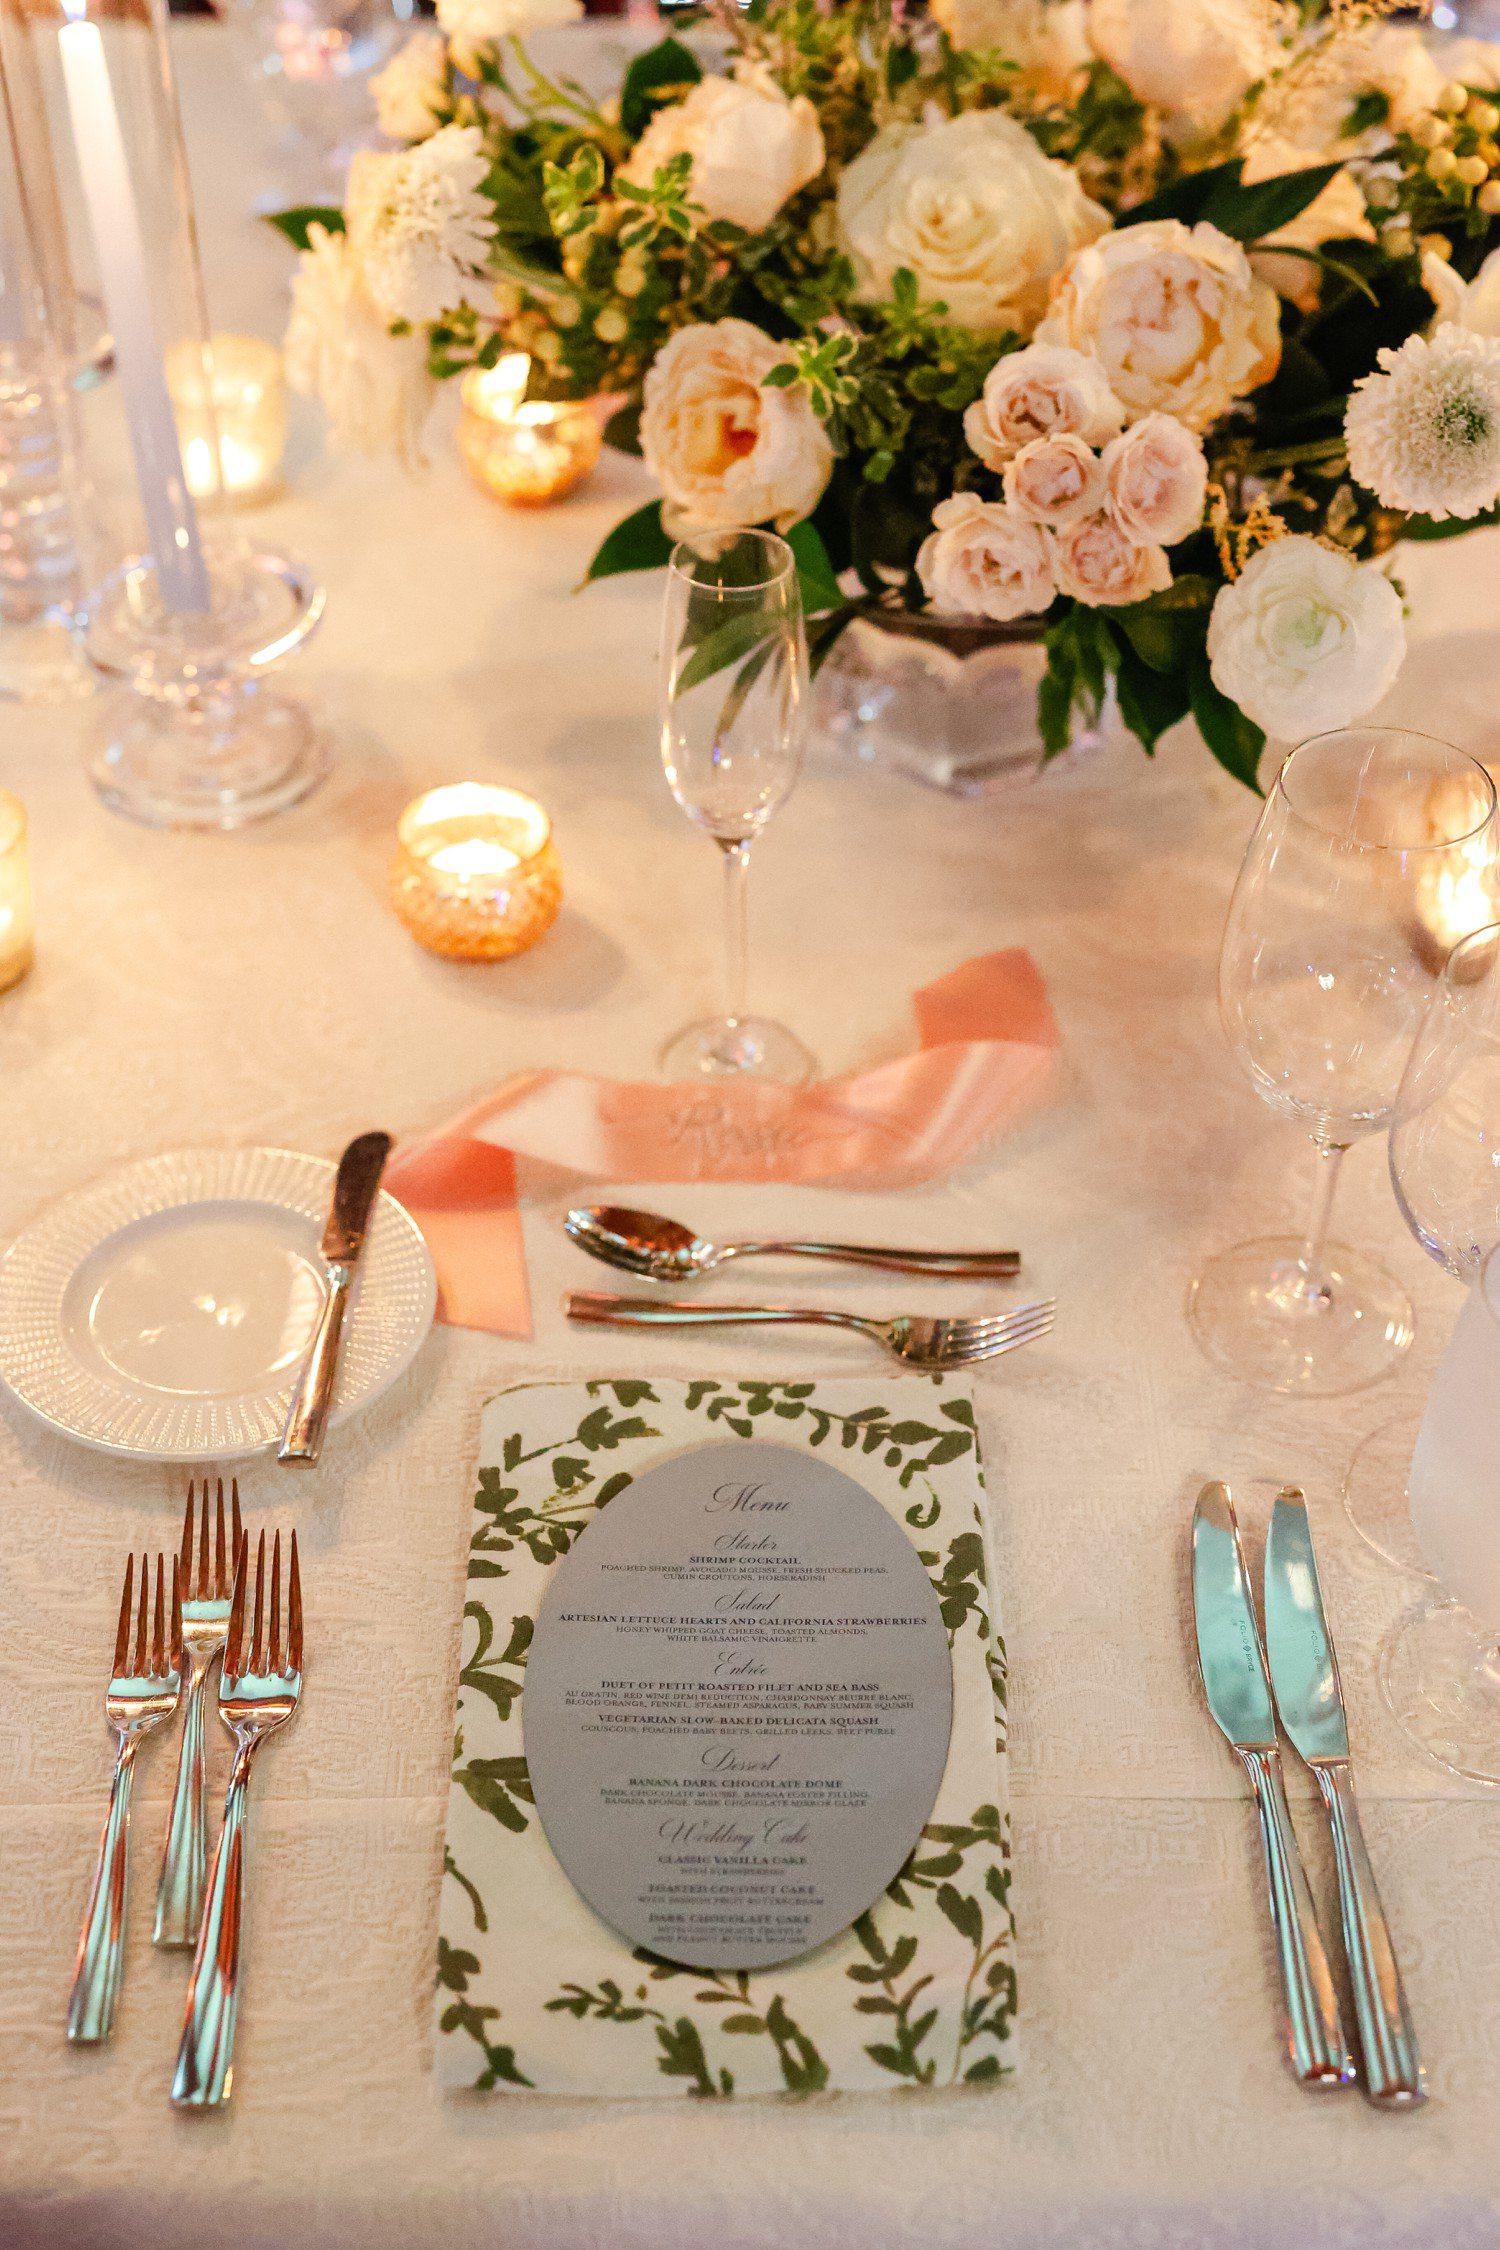 Wedding Place Setting with Ribbon